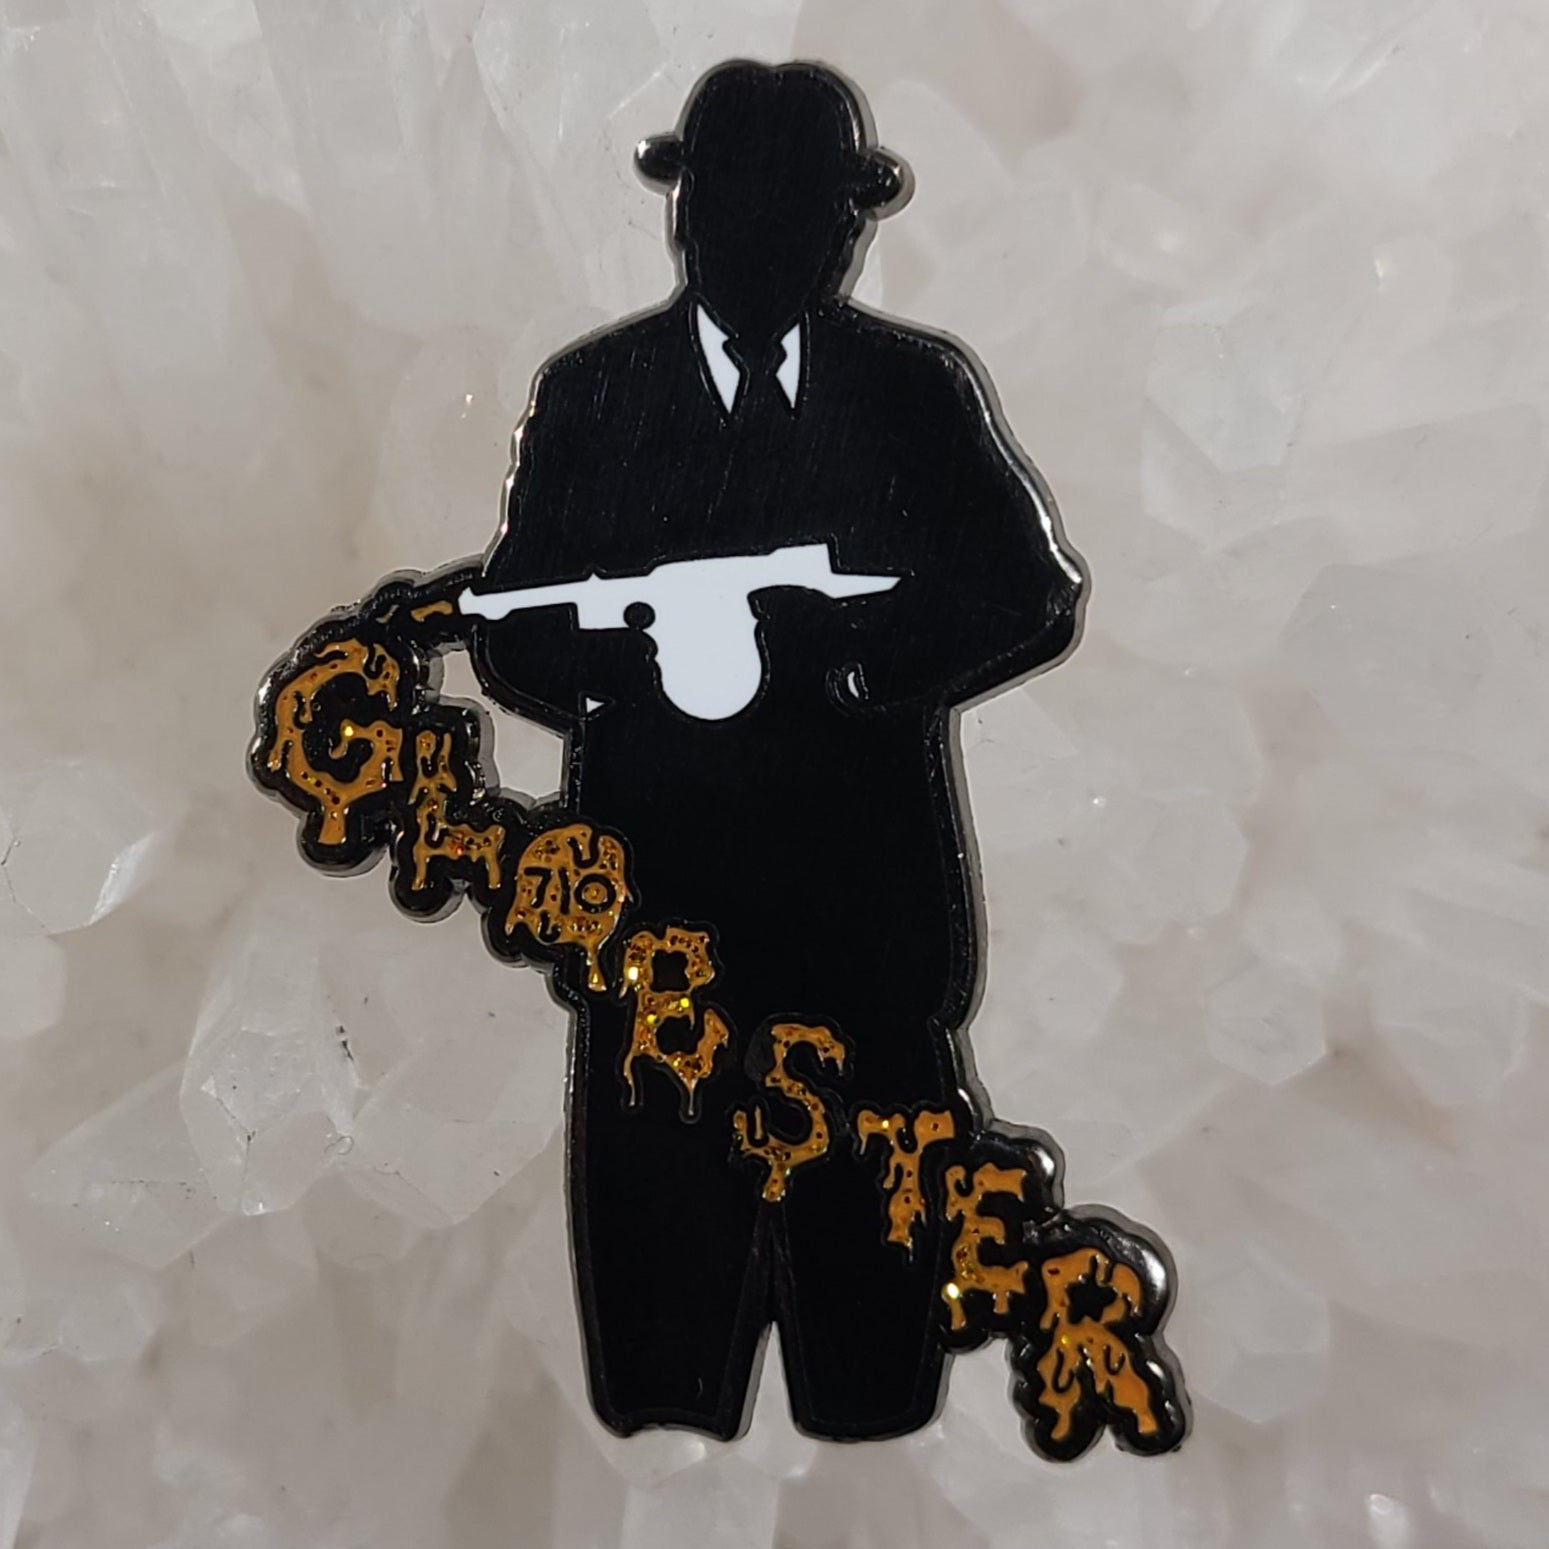 Mobsters Globsters Dab 710 Mafia Weed Tommy Gun Enamel Pins Hat Pins Lapel Pin Brooch Badge Festival Pin